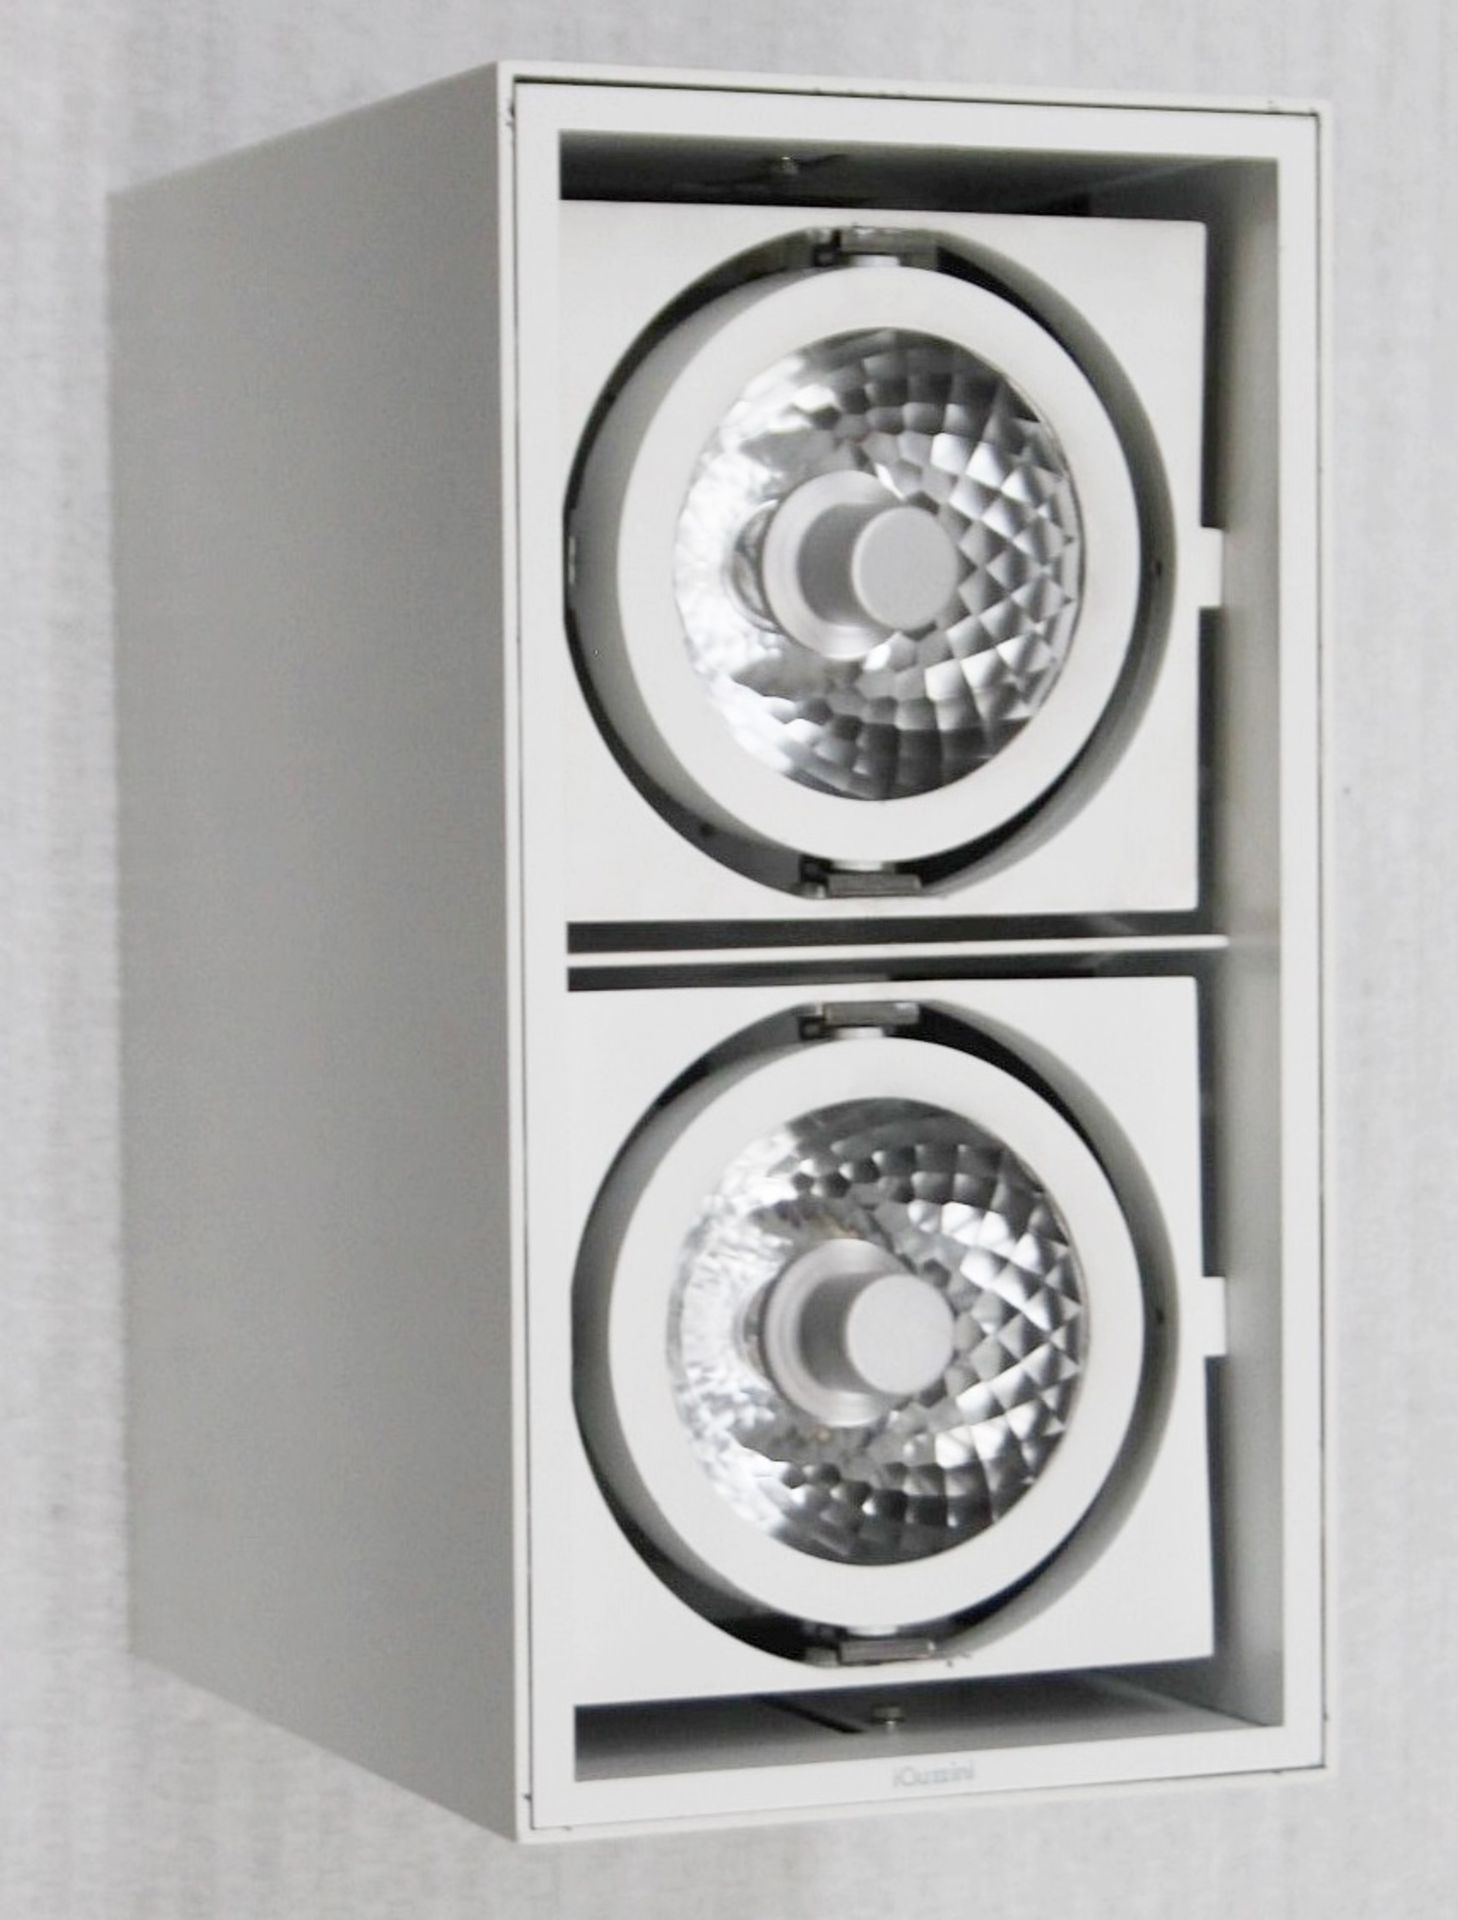 4 x IGUZZINI Commercial Twin Directional Gimble Spot Light Fittings In Metal Casings (5326) - Image 3 of 7